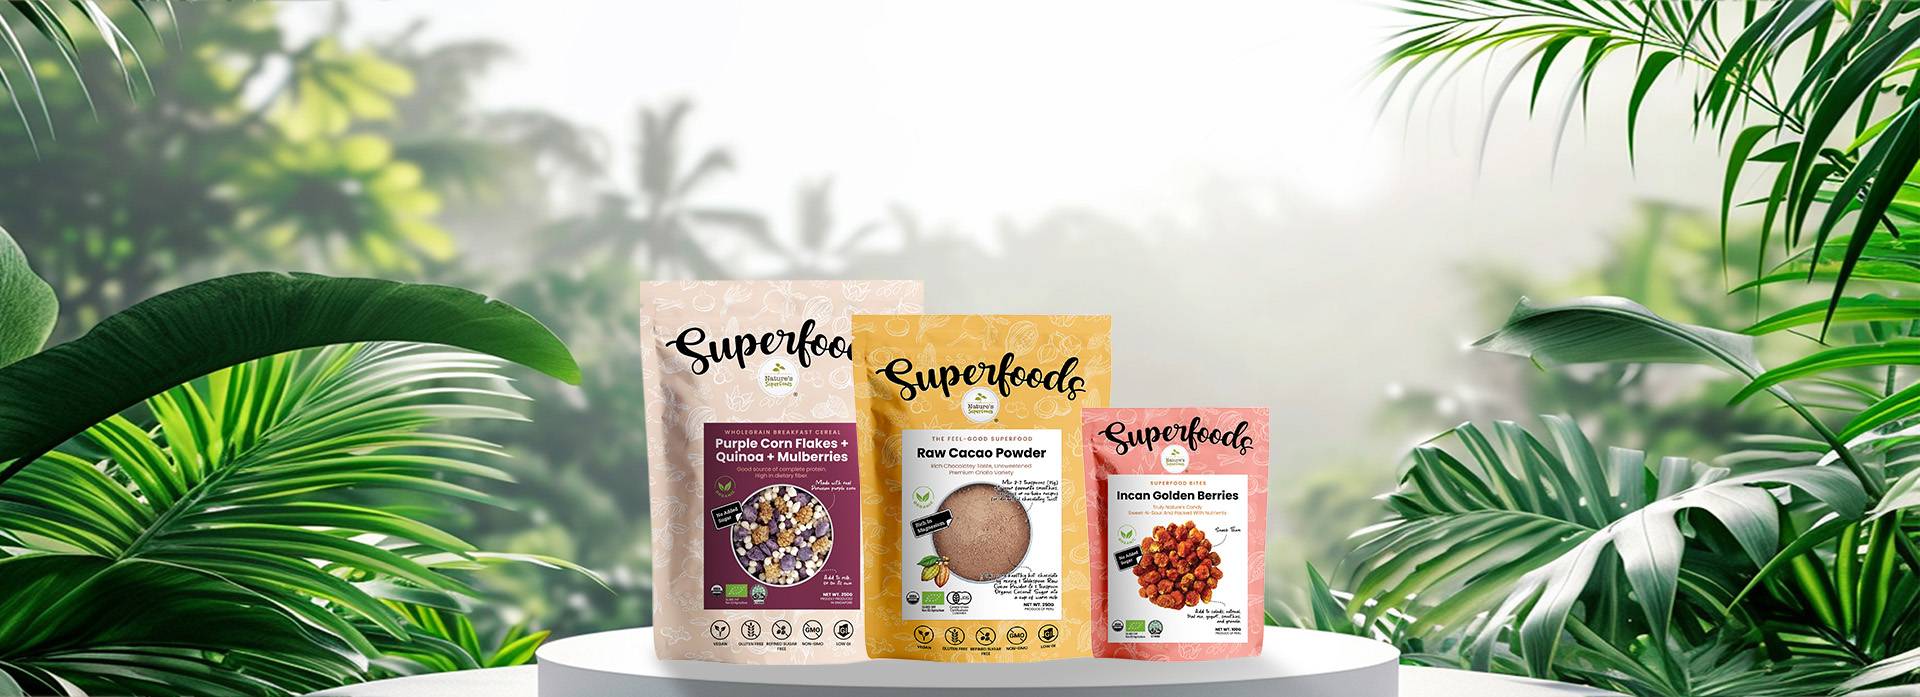 Superfoods Products